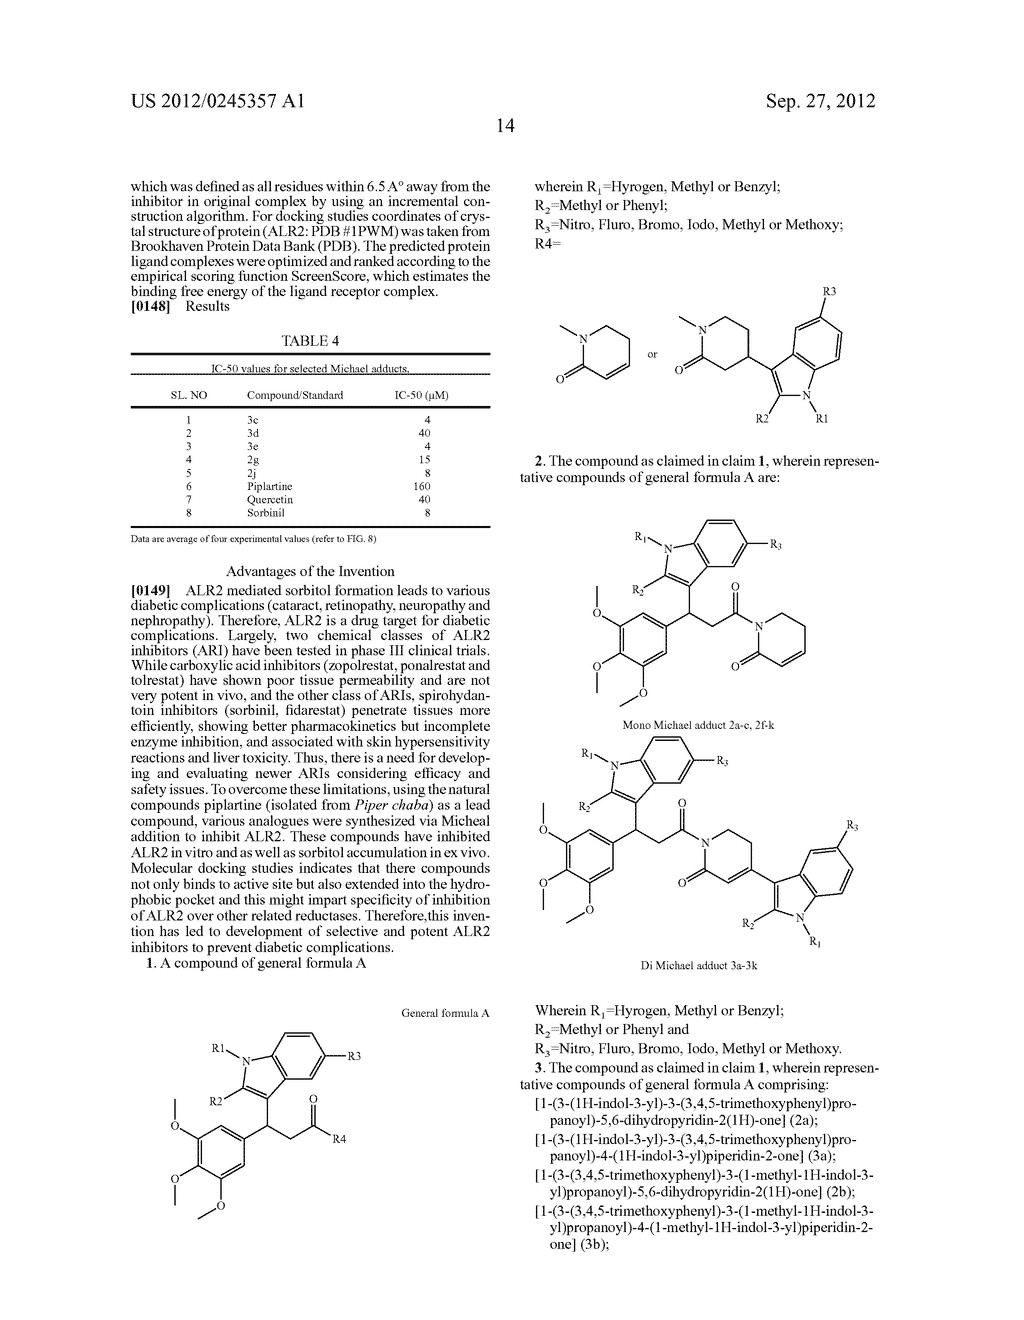 ALR2 INHIBITORS AND THEIR SYNTHESIS FROM A NATURAL SOURCE - diagram, schematic, and image 21